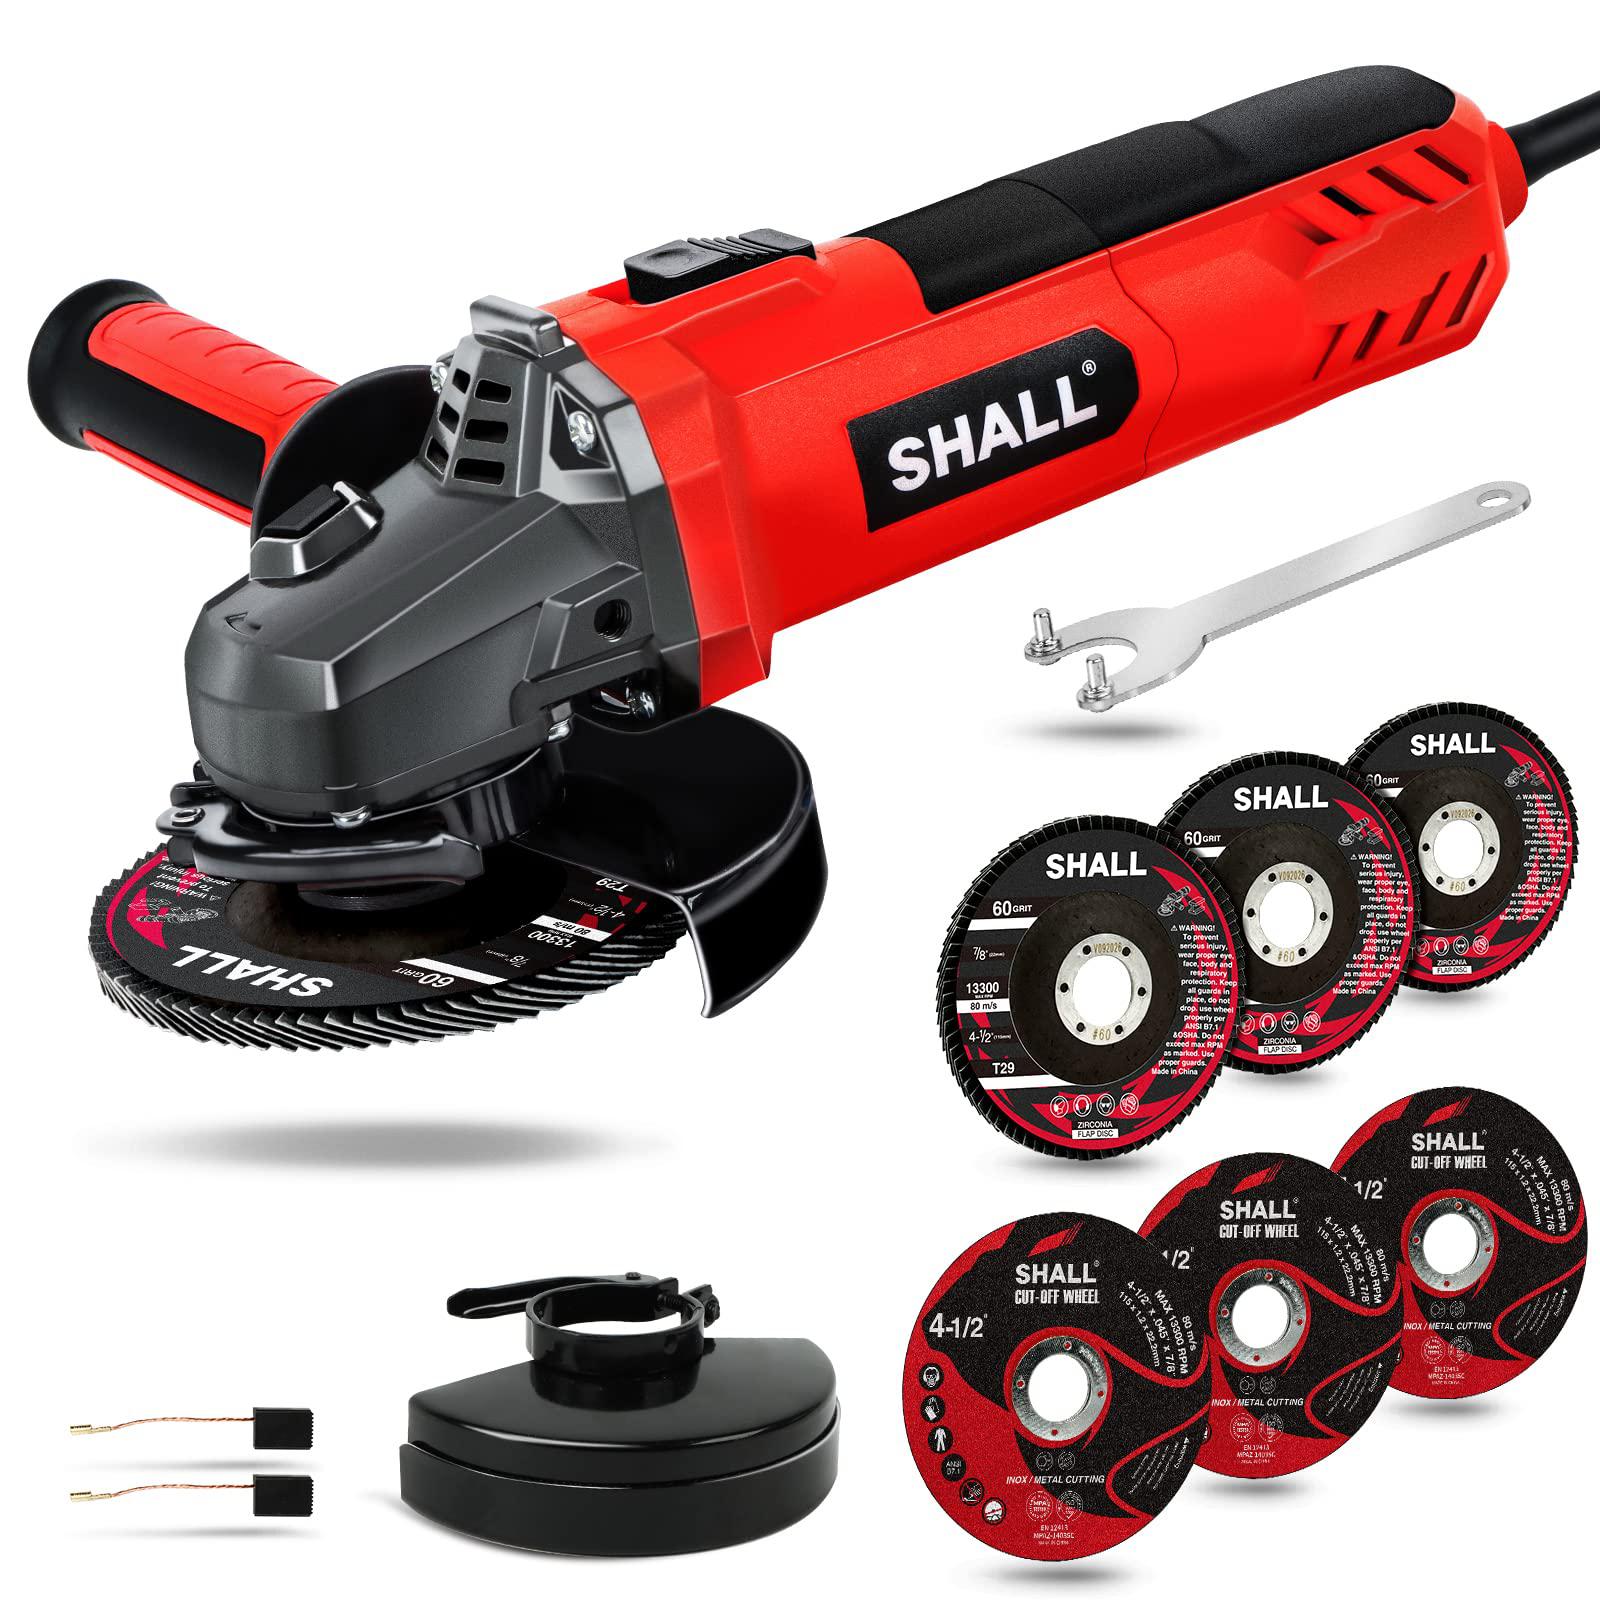 shall angle grinder tool 7.5amp 4-1/2 inch grinders power tools, electric metal grinder 12000 rpm with 2 safety guards, 3 cut